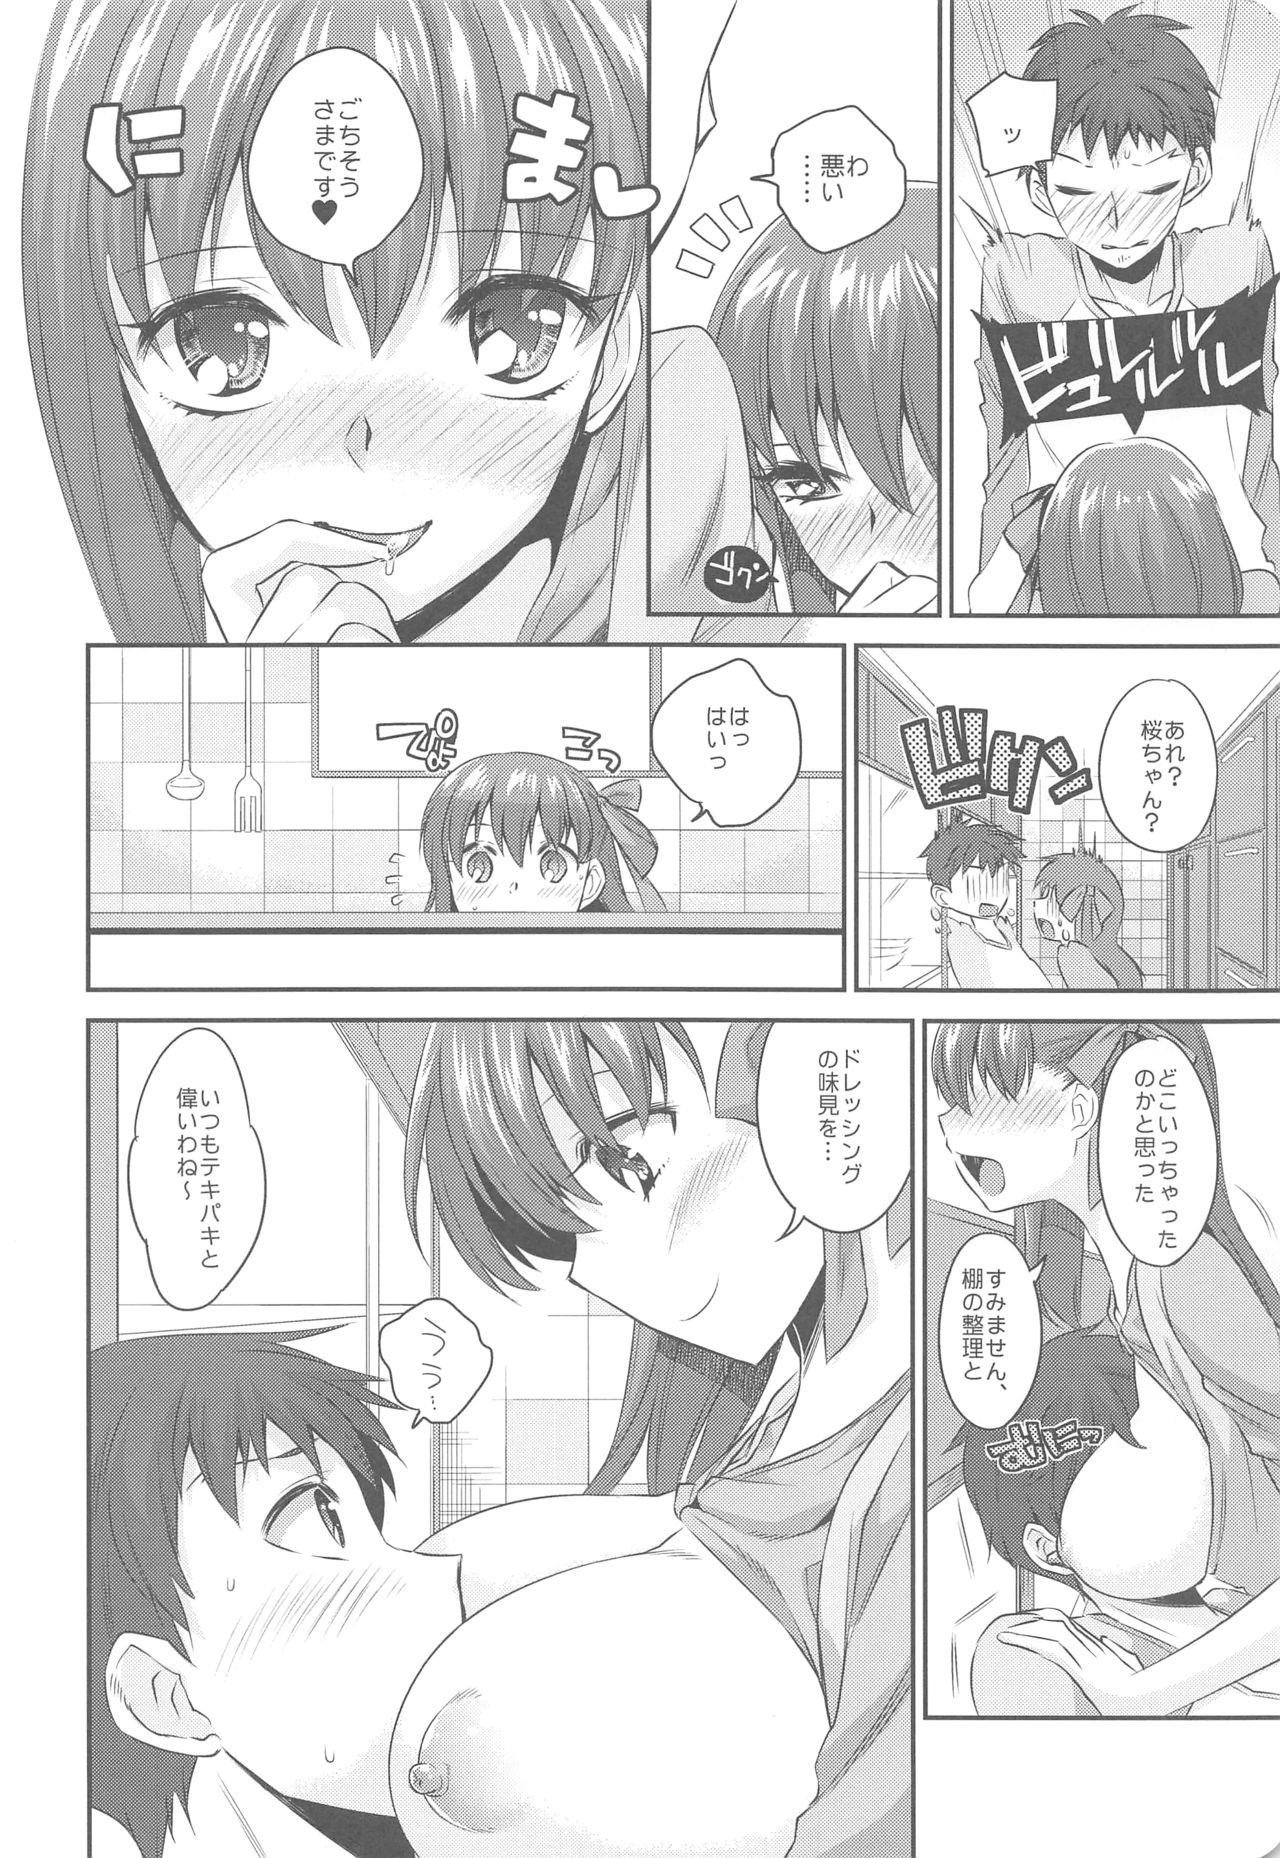 Pounding Kitchen H - Fate stay night Orgasmus - Page 8